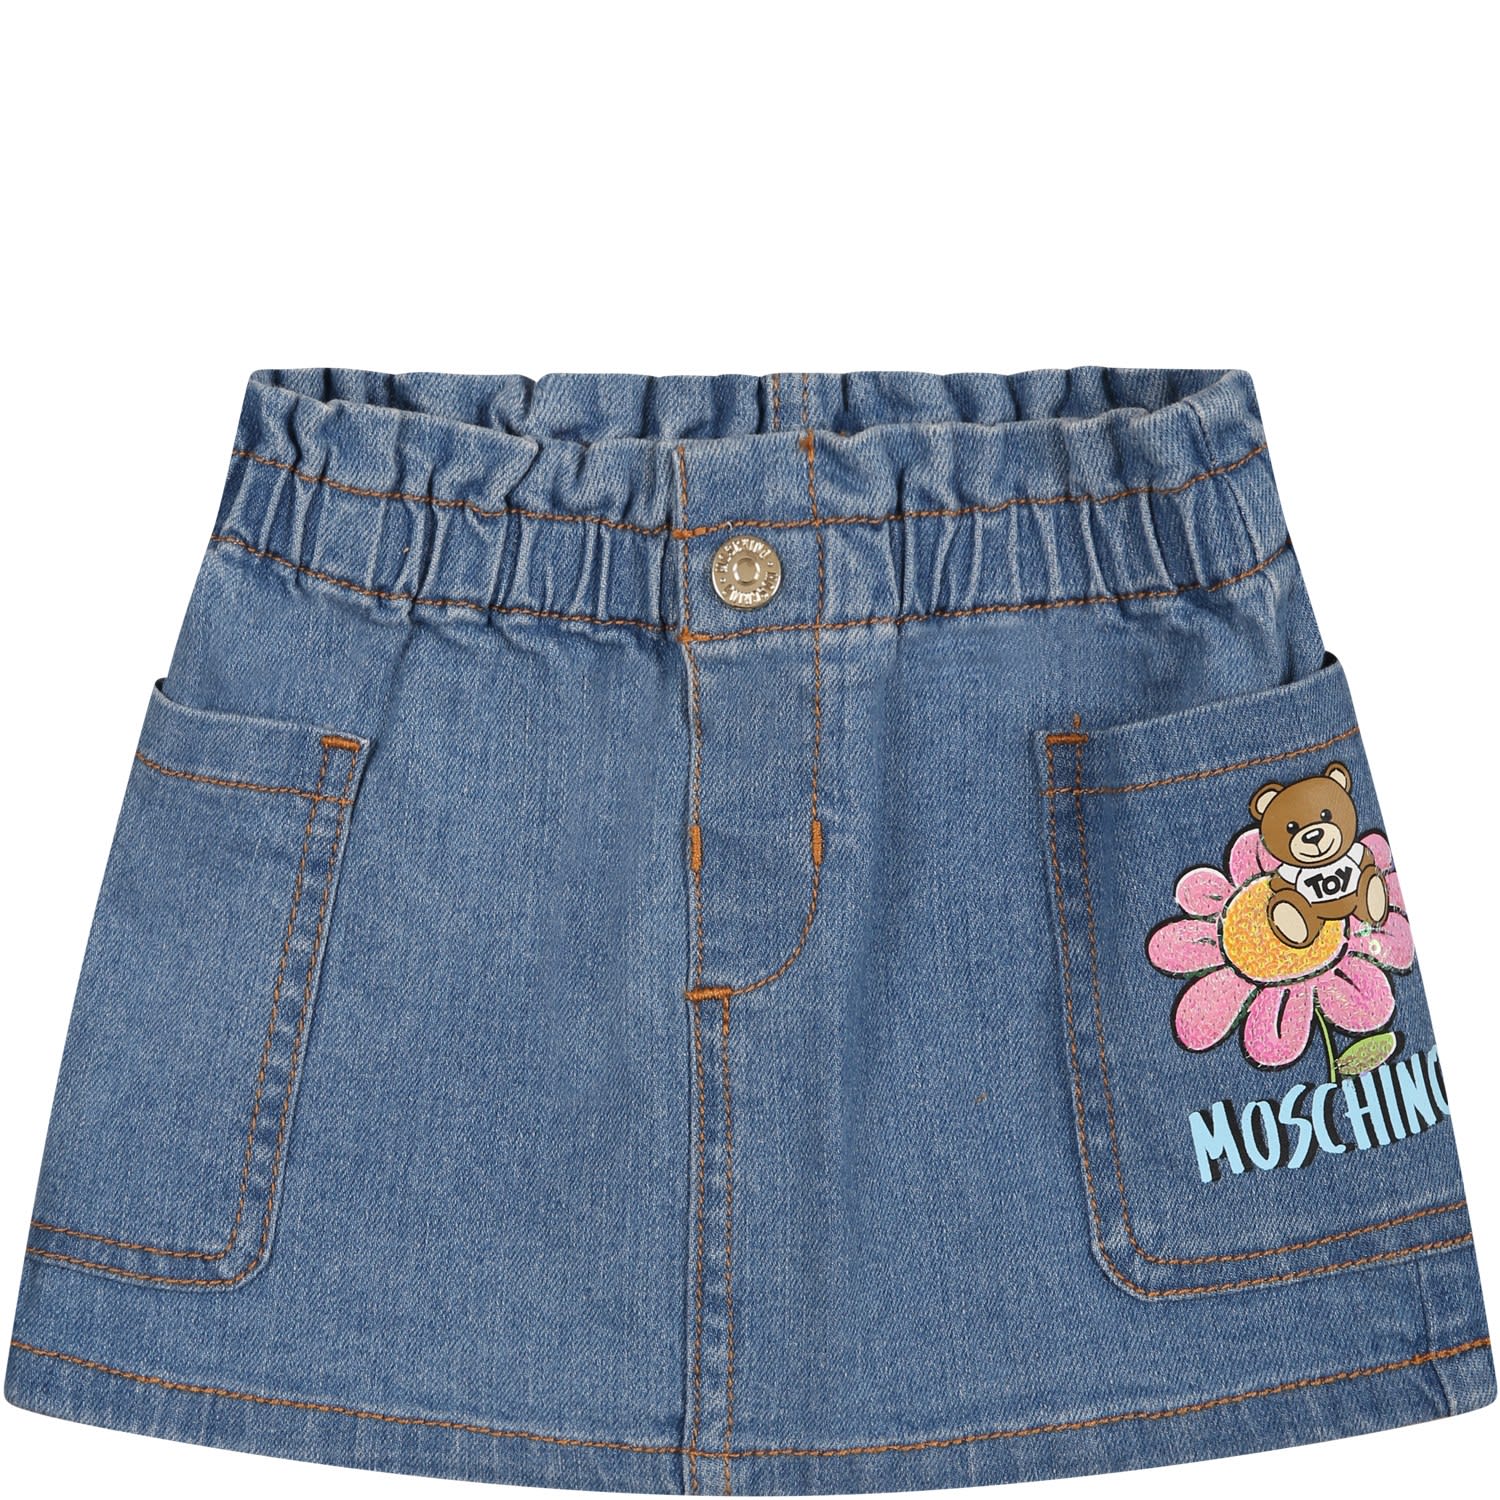 MOSCHINO BLUE SKIRT FOR BABY GIRL WITH FLOWER AND TEDDY BEAR